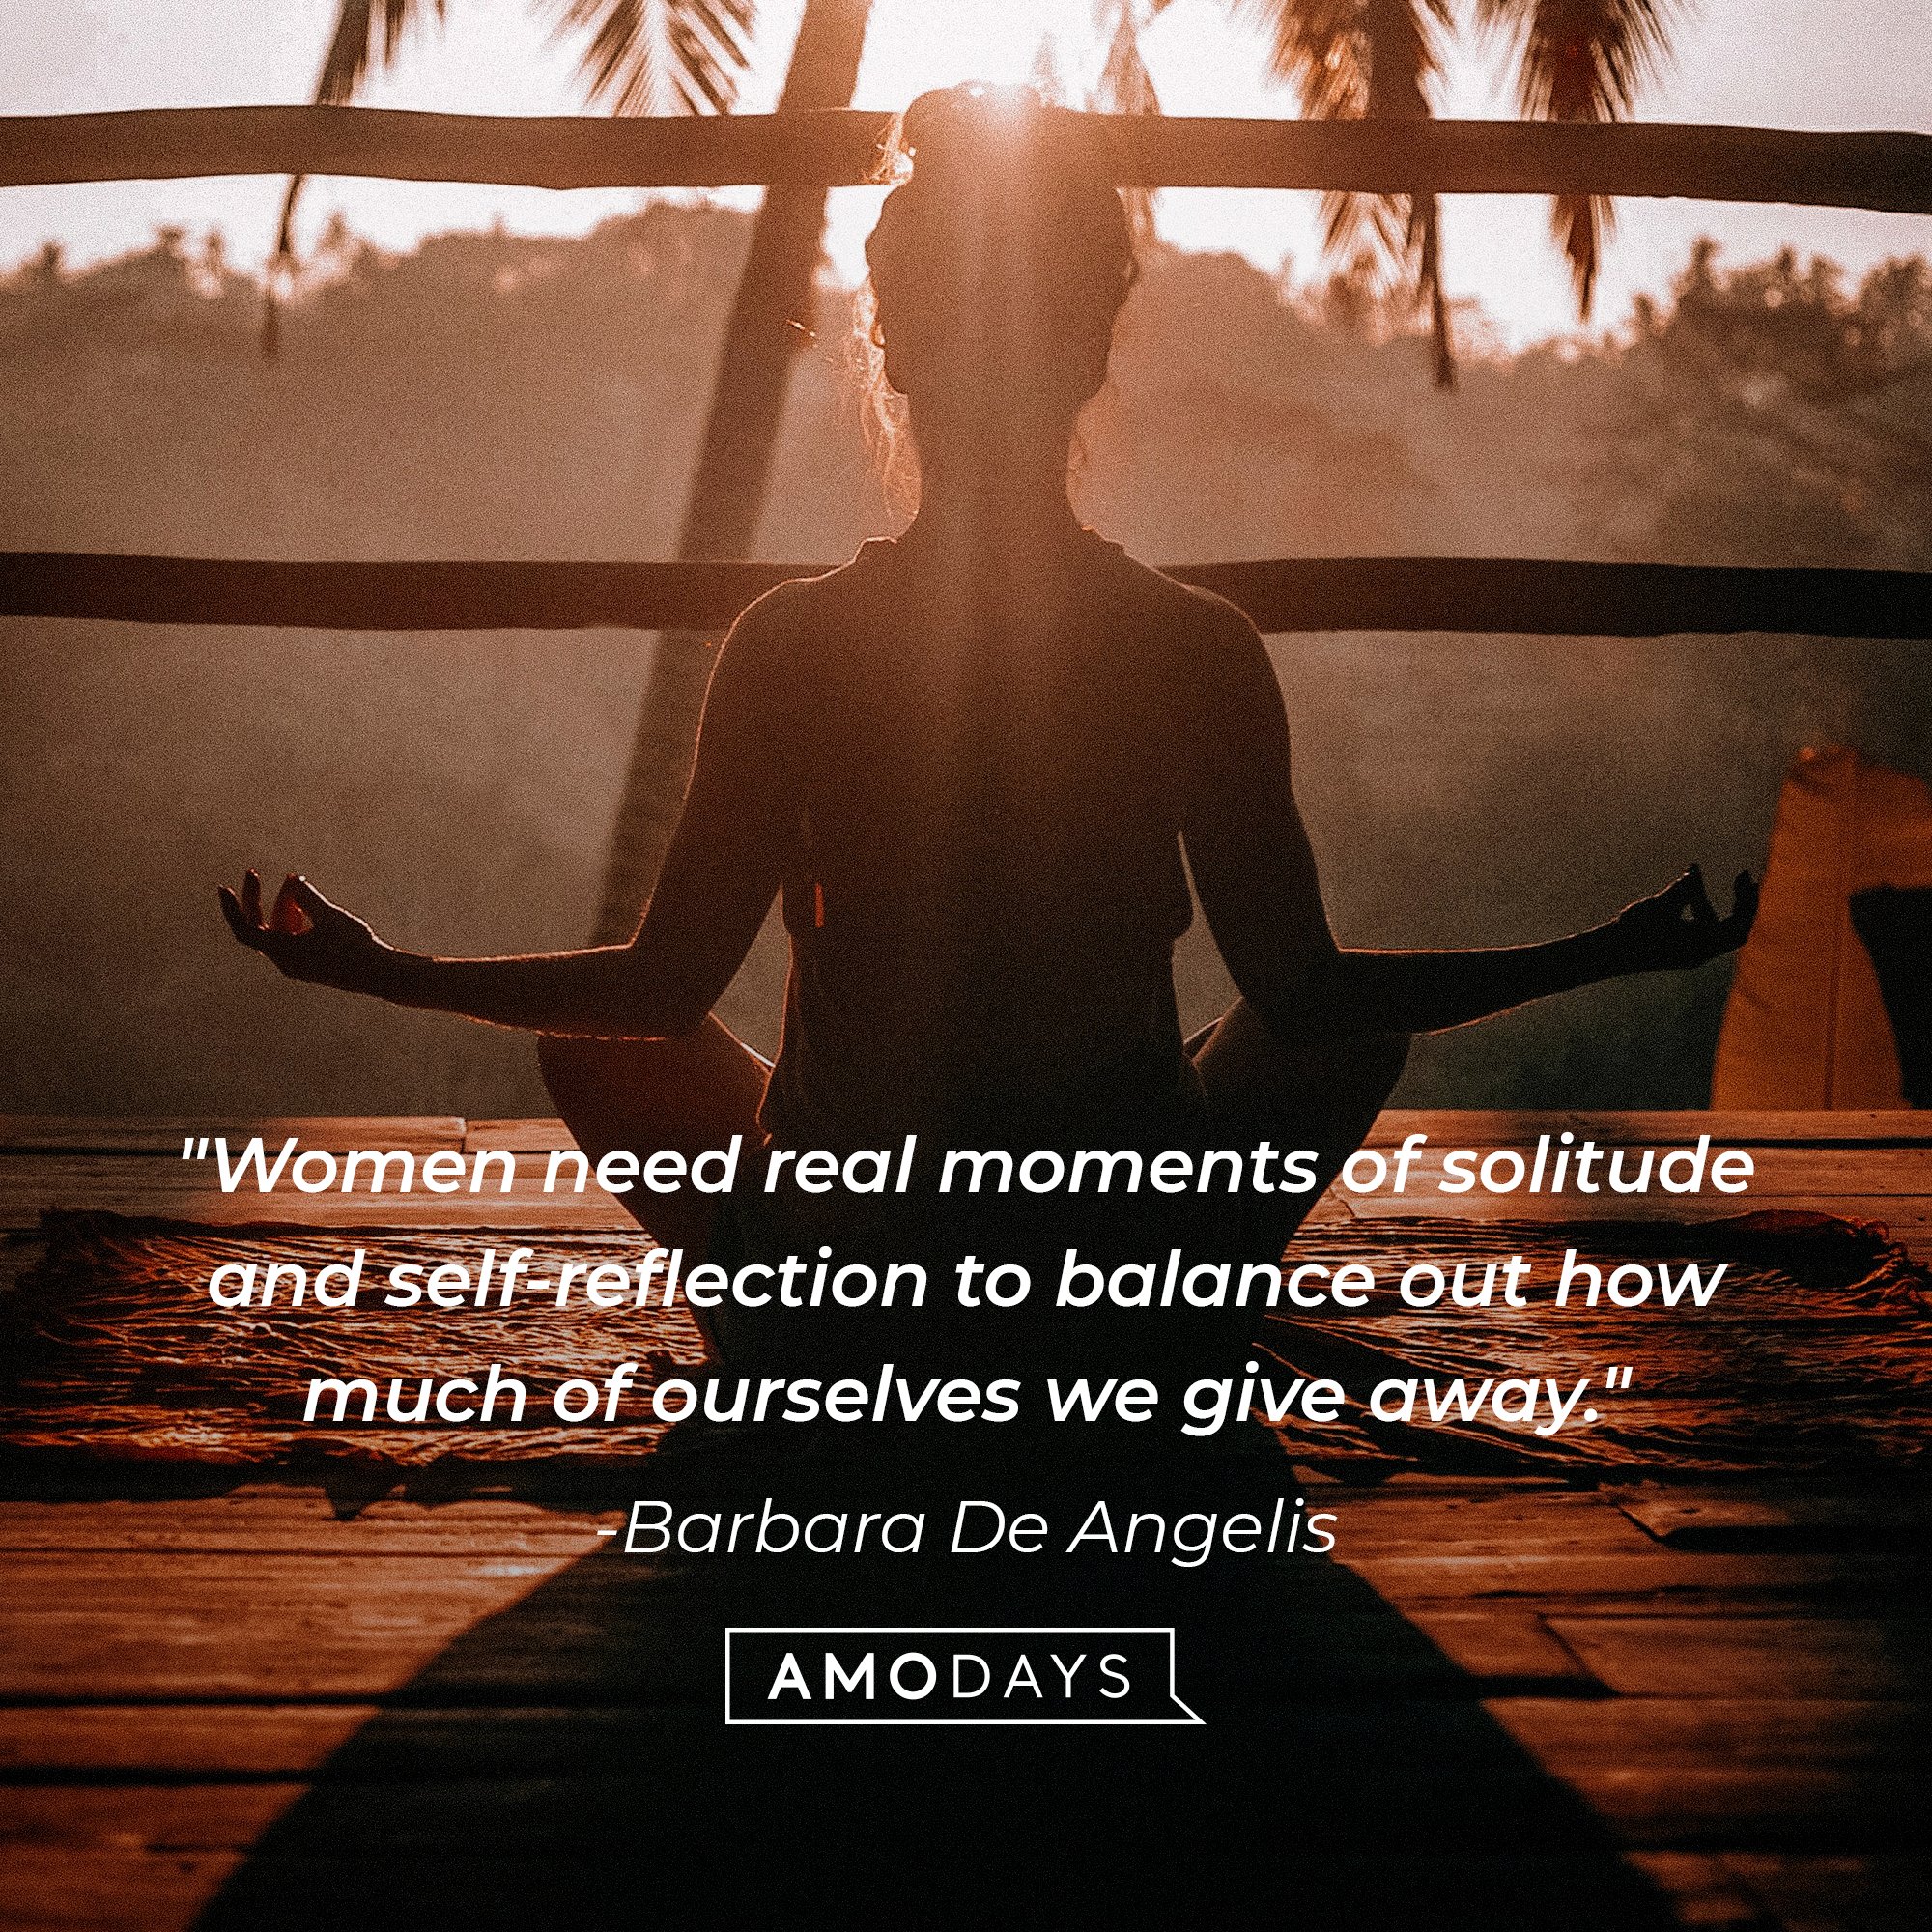  Barbara De Angelis 's quote: "Women need real moments of solitude and self-reflection to balance out how much of ourselves we give away." | Image: AmoDays